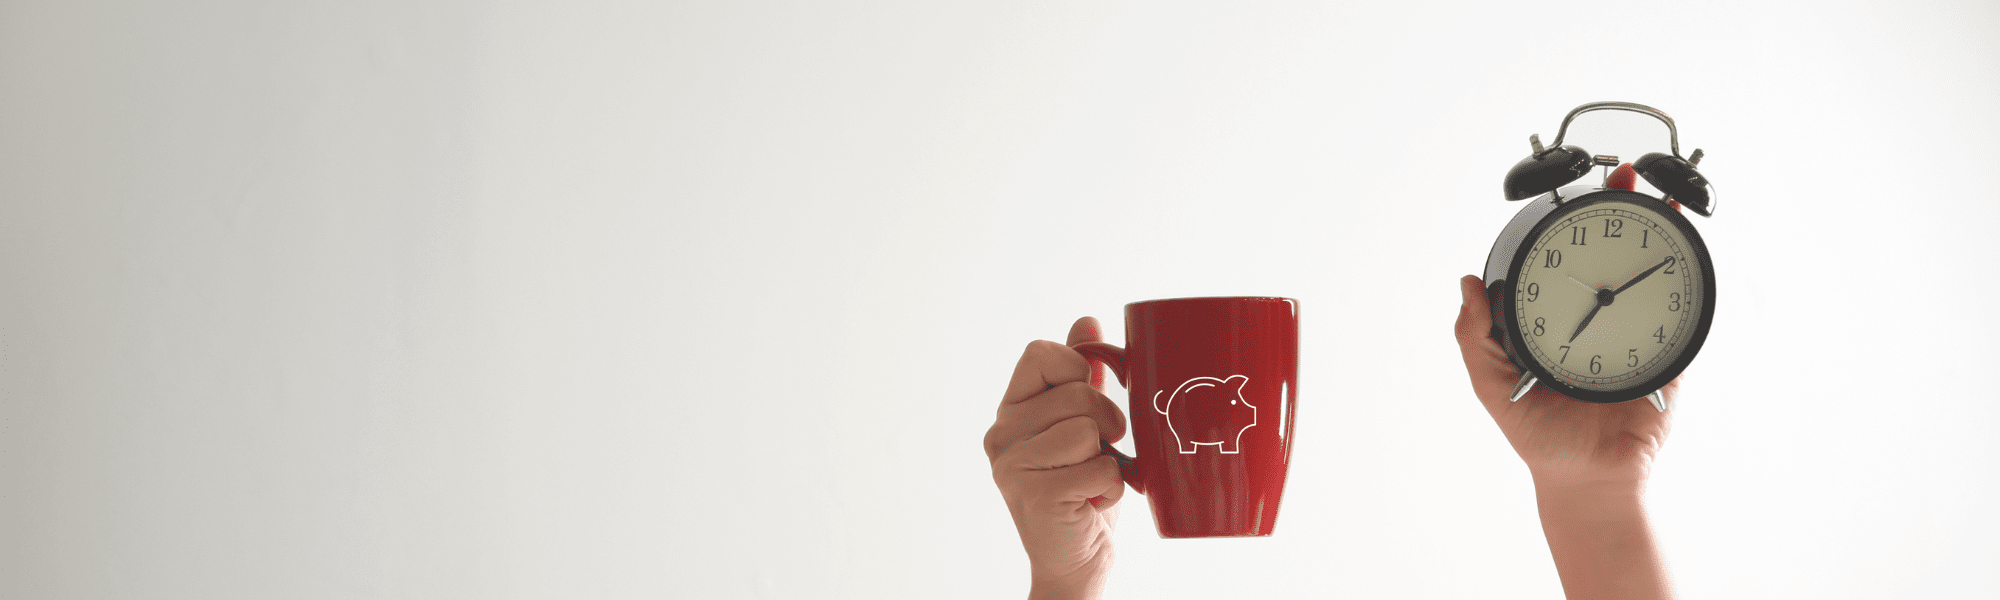 Person holding a red cup with a white pig icon outline on it in one hand and a black alarm clock in the other